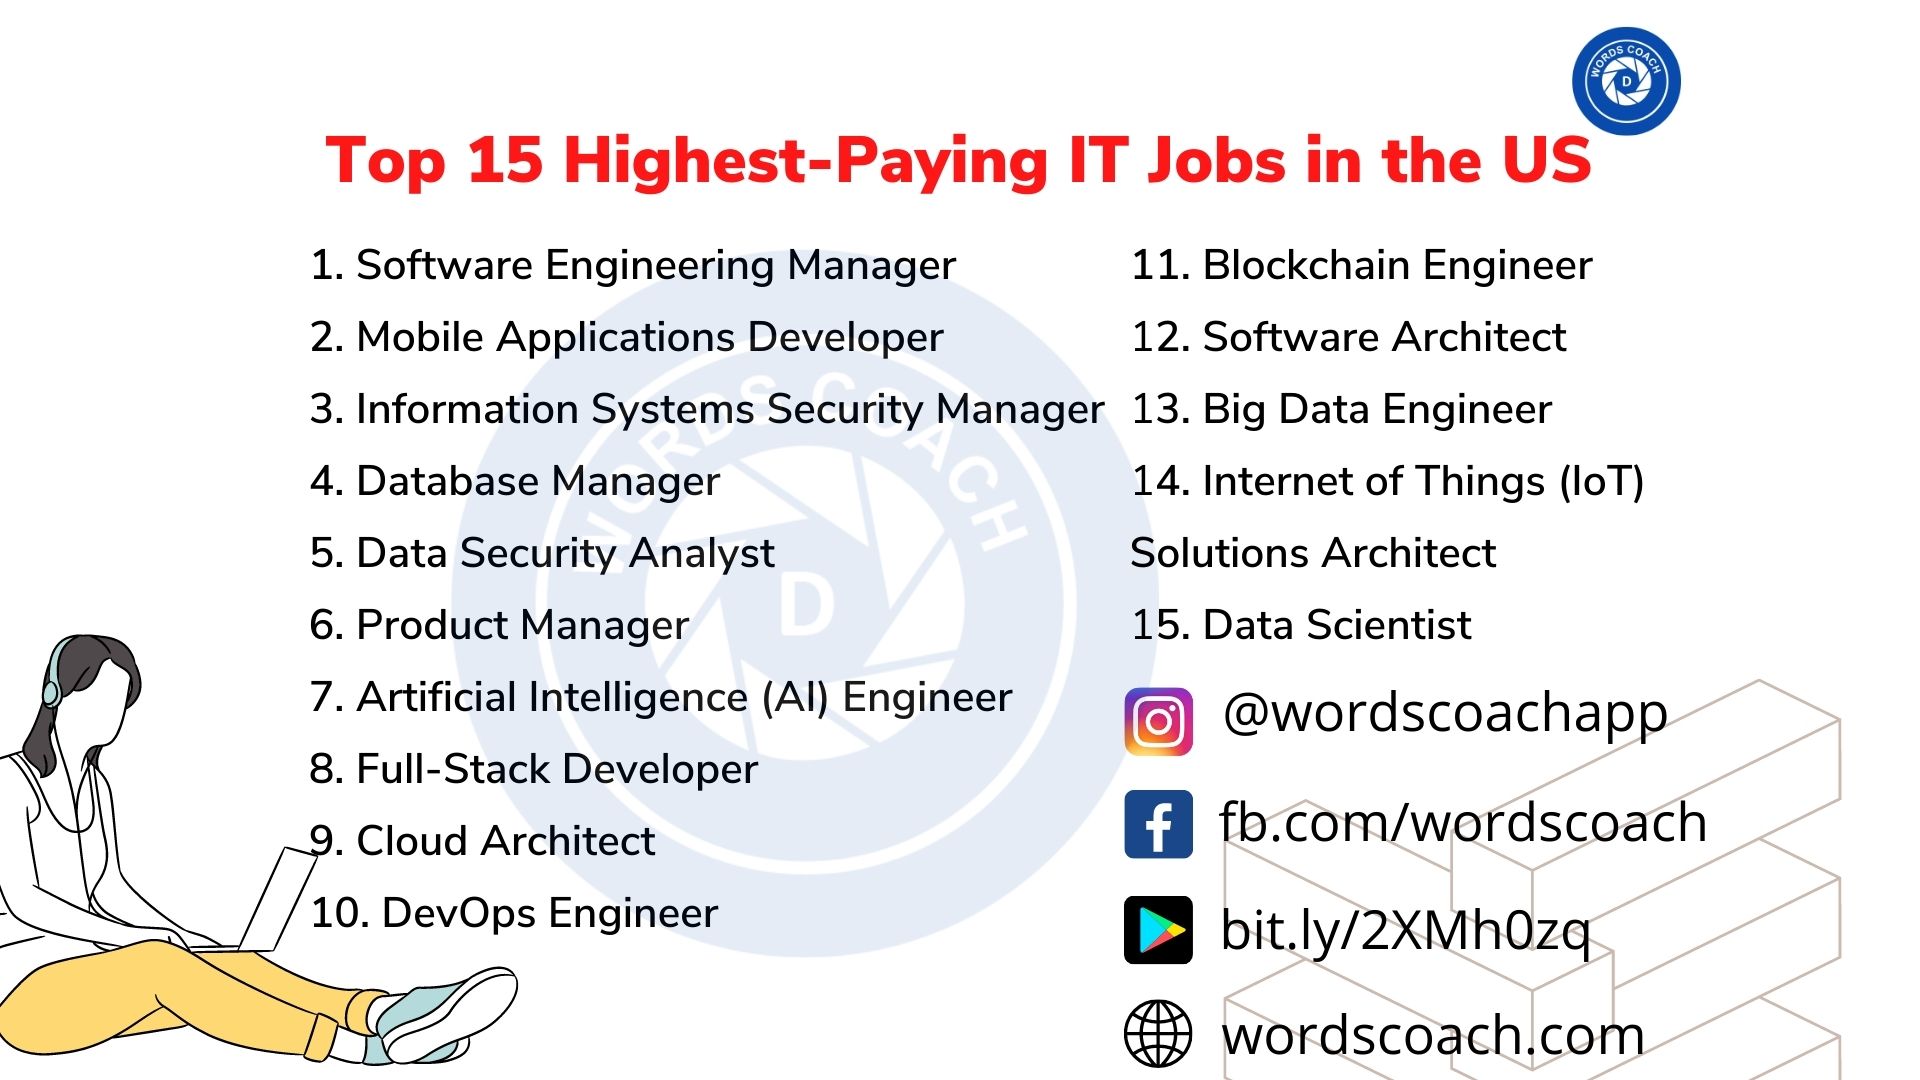 Top 15 Highest-Paying IT Jobs in the US